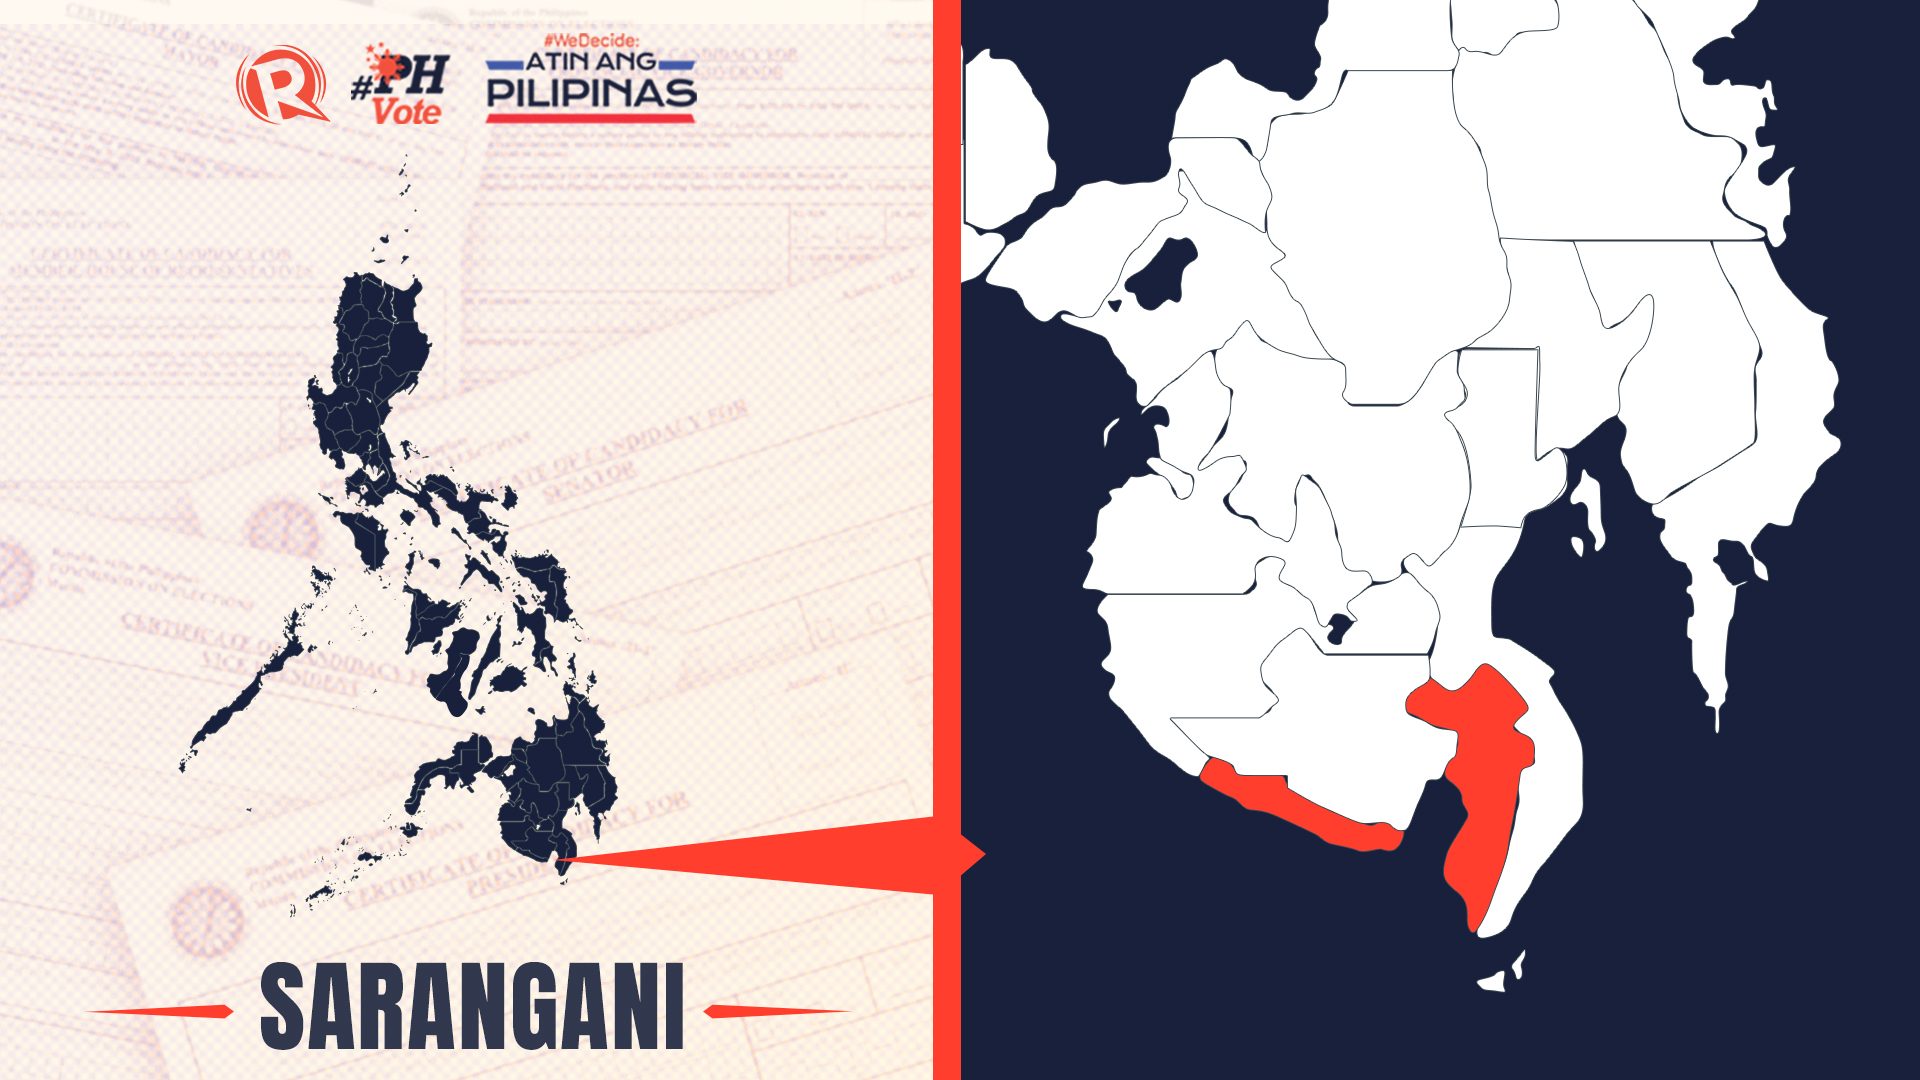 LIST: Who is running in Sarangani in the 2022 Philippine elections?